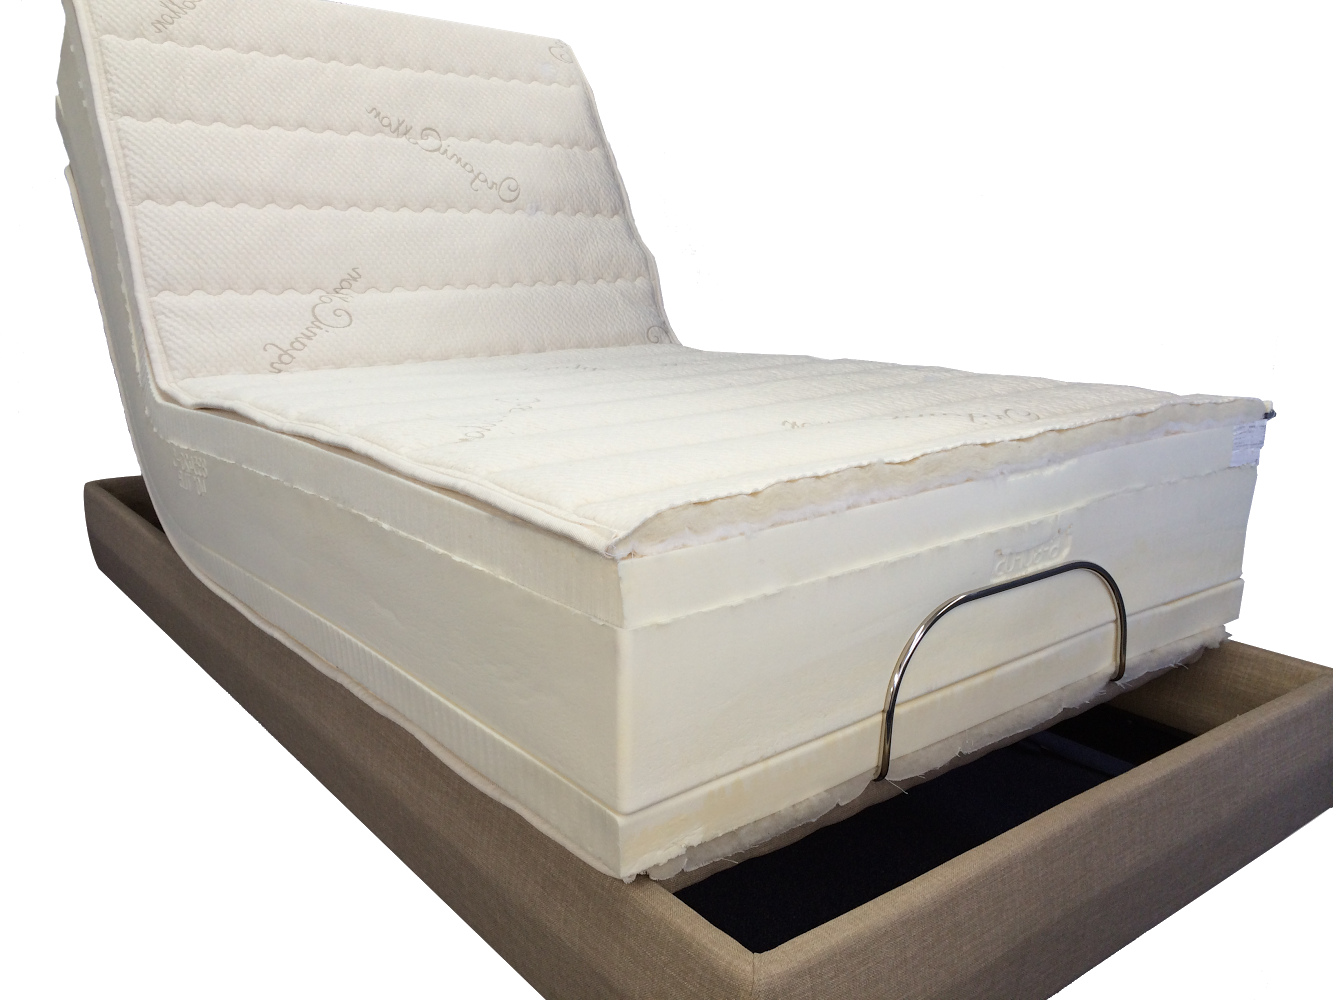 twinsize adjustable bed Phoenix adjustable bed motorized frame foundation motion mattress replacement